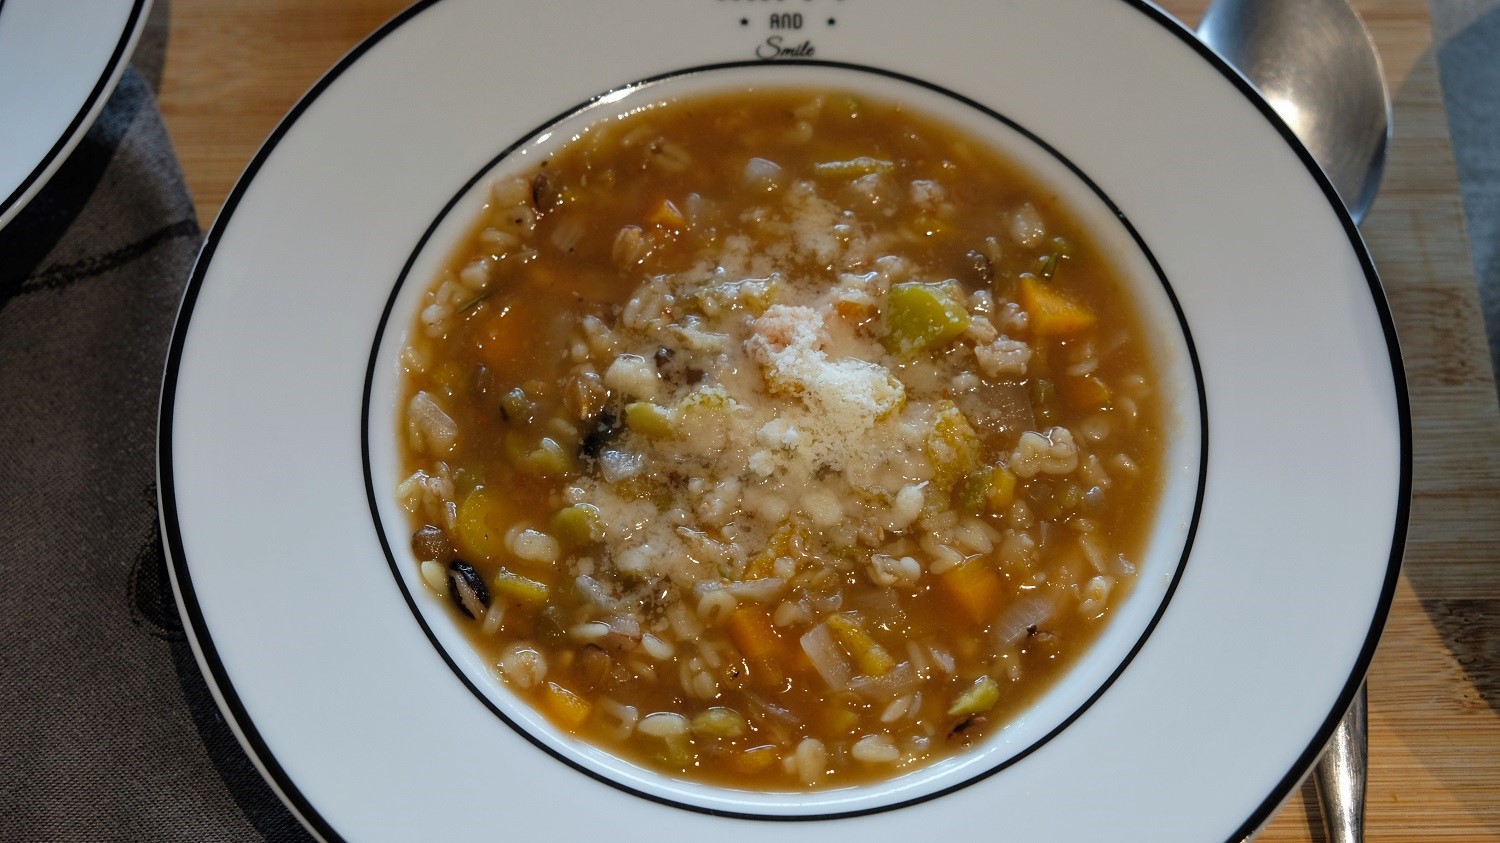 Minestrone style soup